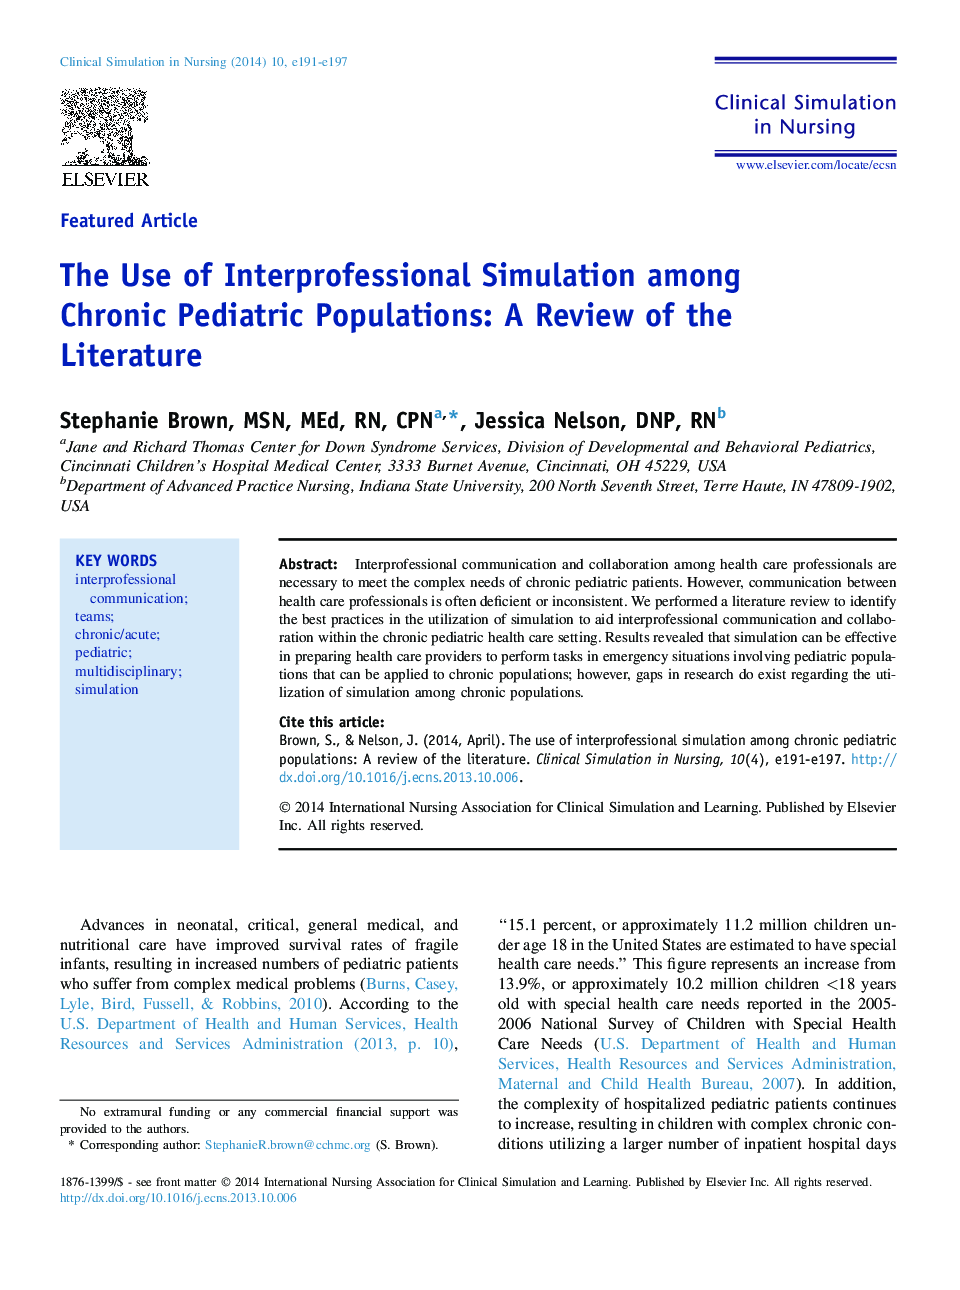 The Use of Interprofessional Simulation among Chronic Pediatric Populations: A Review of the Literature